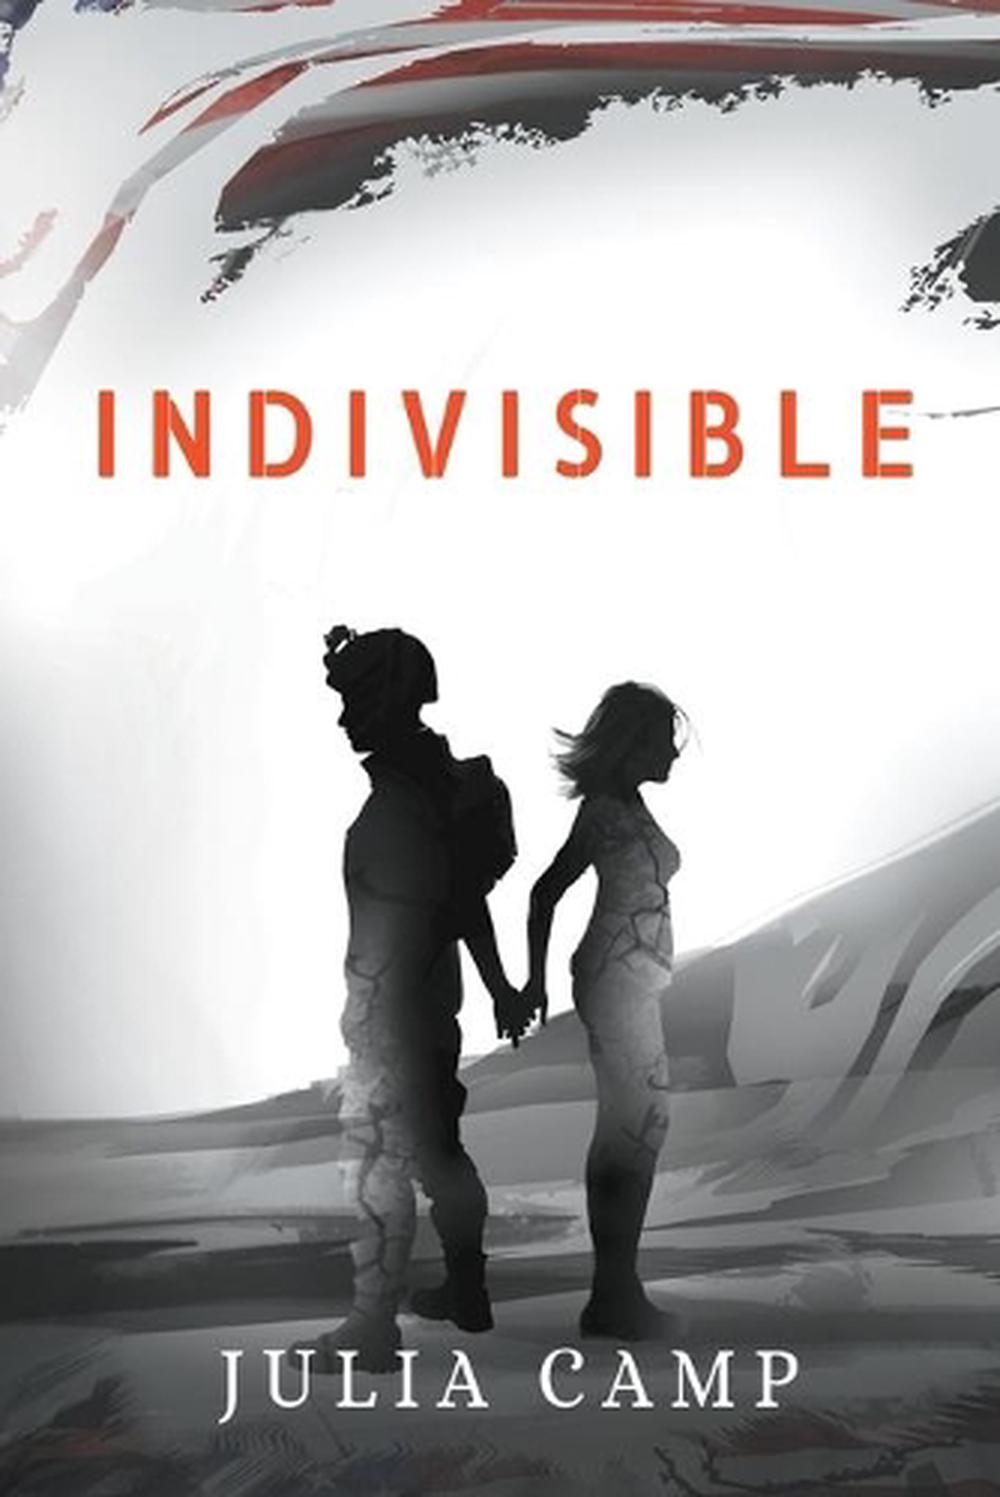 inDIVISIBLE by Robyn Heirtzler